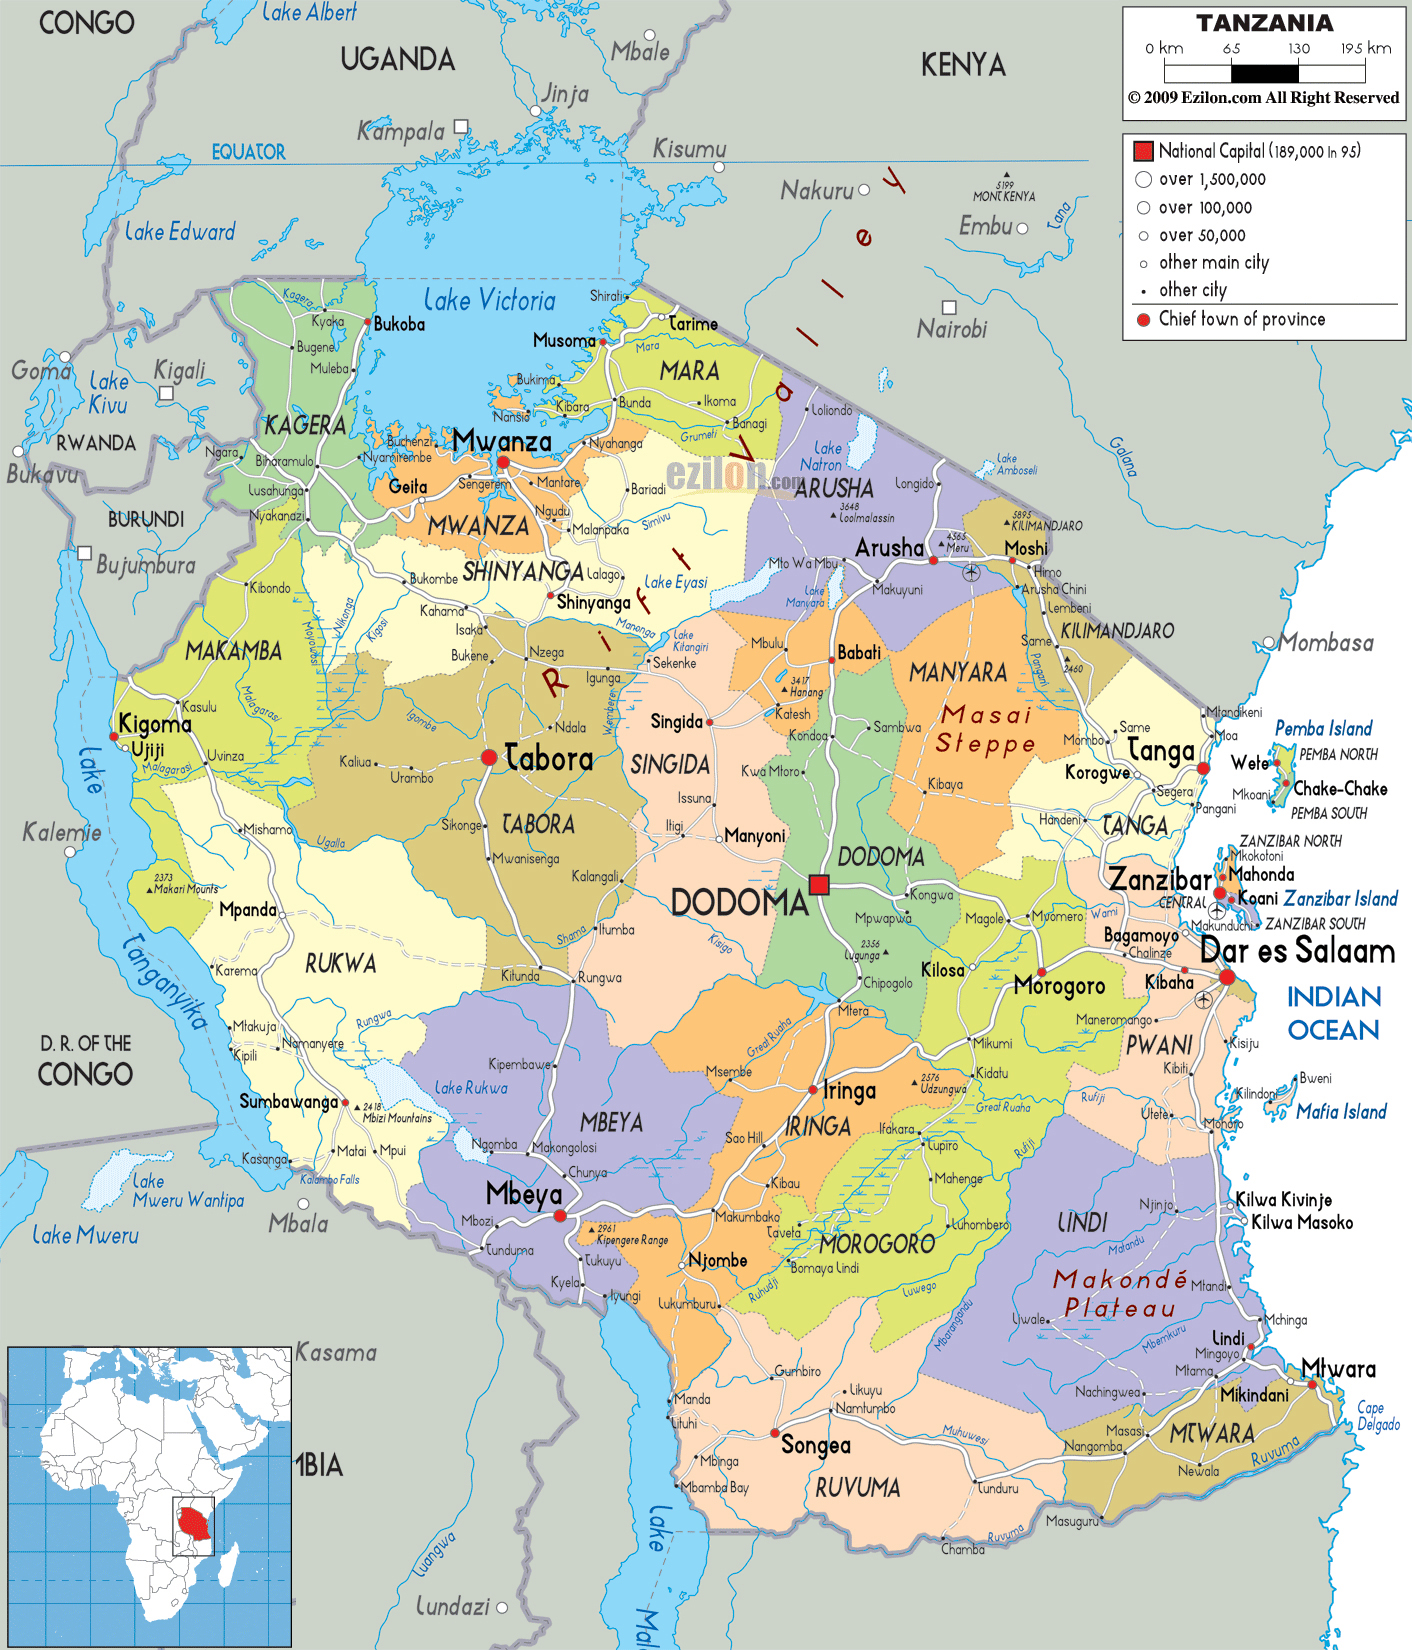 Large Detailed Administrative Map Of Tanzania With All Cities Roads